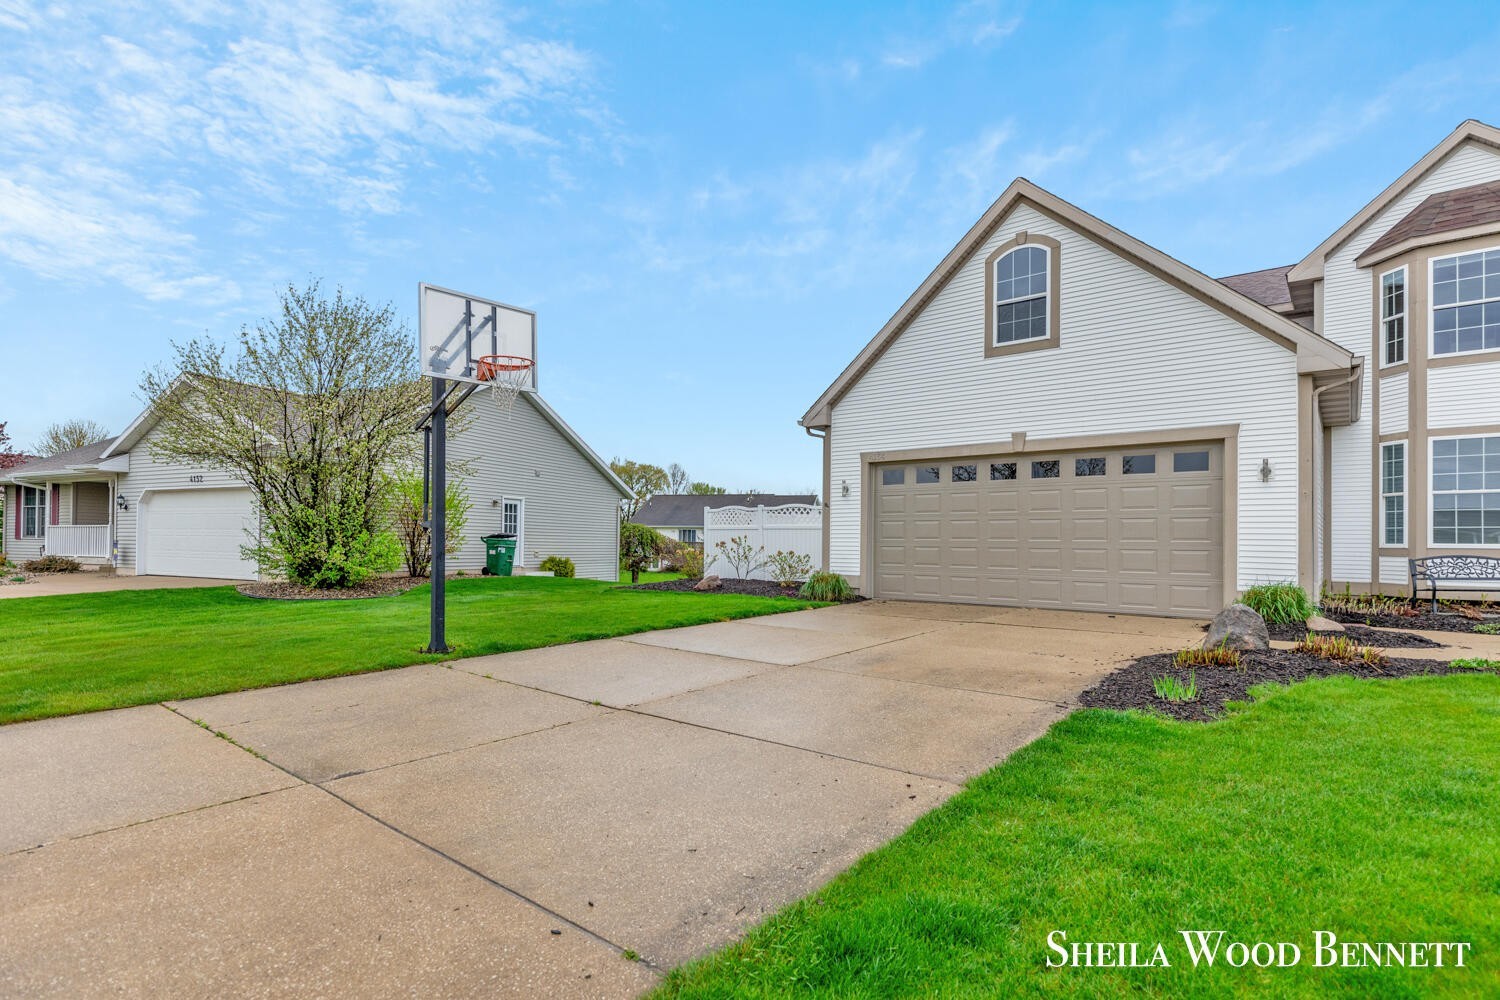 4. 4164 Pintail Court